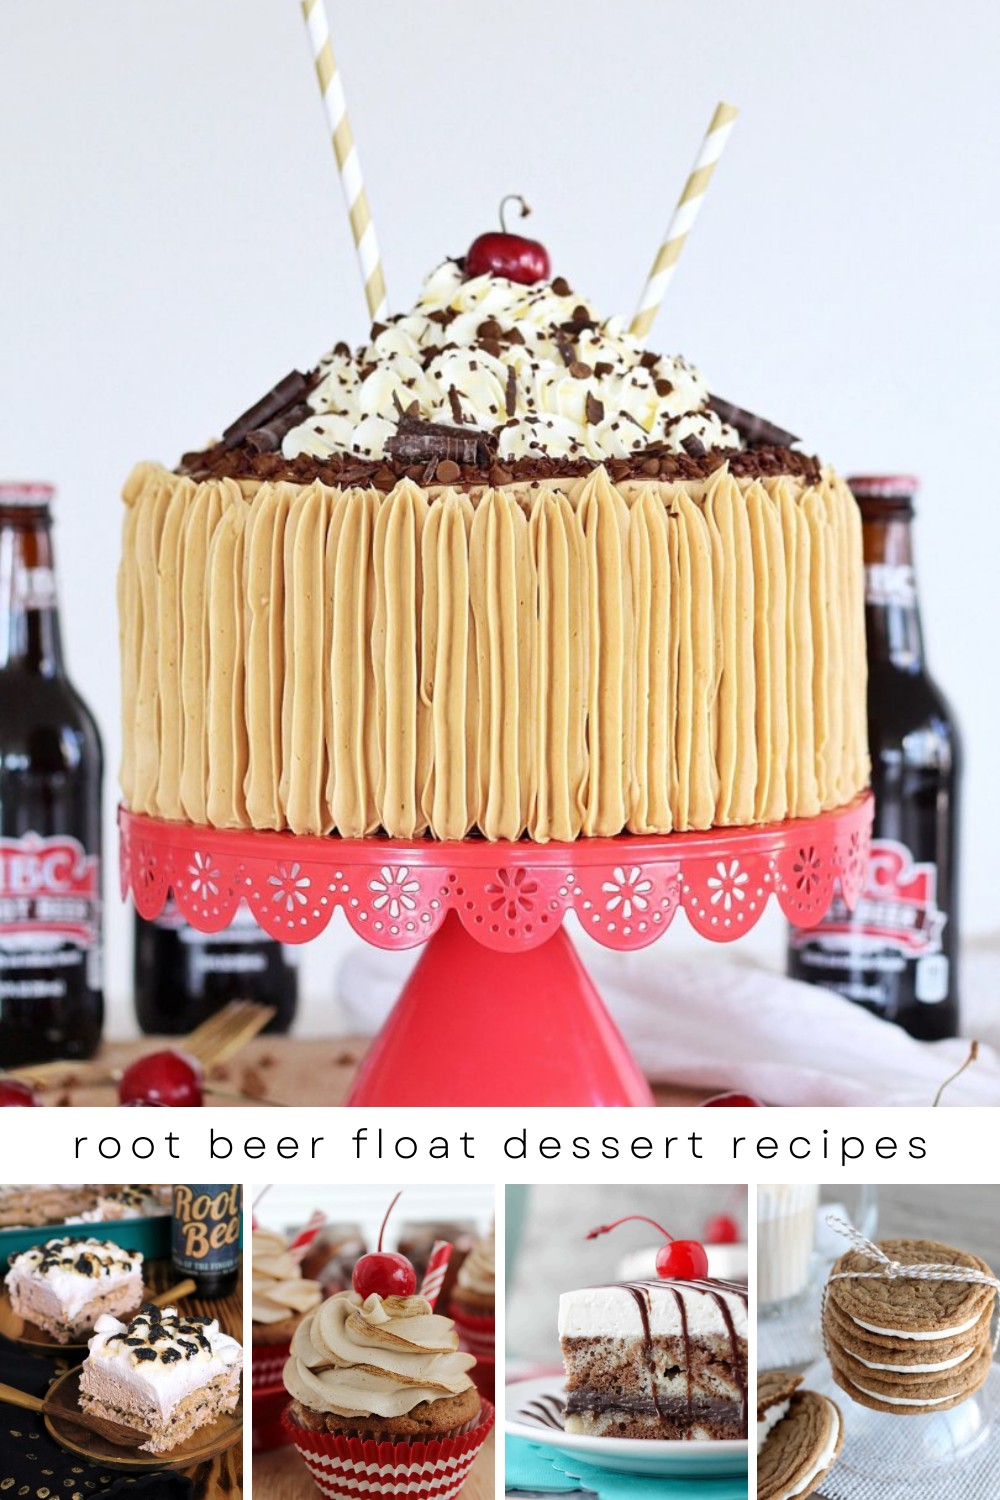 Indulge in the nostalgic flavors of these 10 root beer float desserts! 🍰✨ Enjoy the moist Root Beer Float Cake, chewy Root Beer Float Cookies, and creamy No-Bake Root Beer Float Cheesecake Bars. Perfect for summer gatherings or a sweet treat anytime! #RootBeerFloat #DessertLovers #YummyTreats

